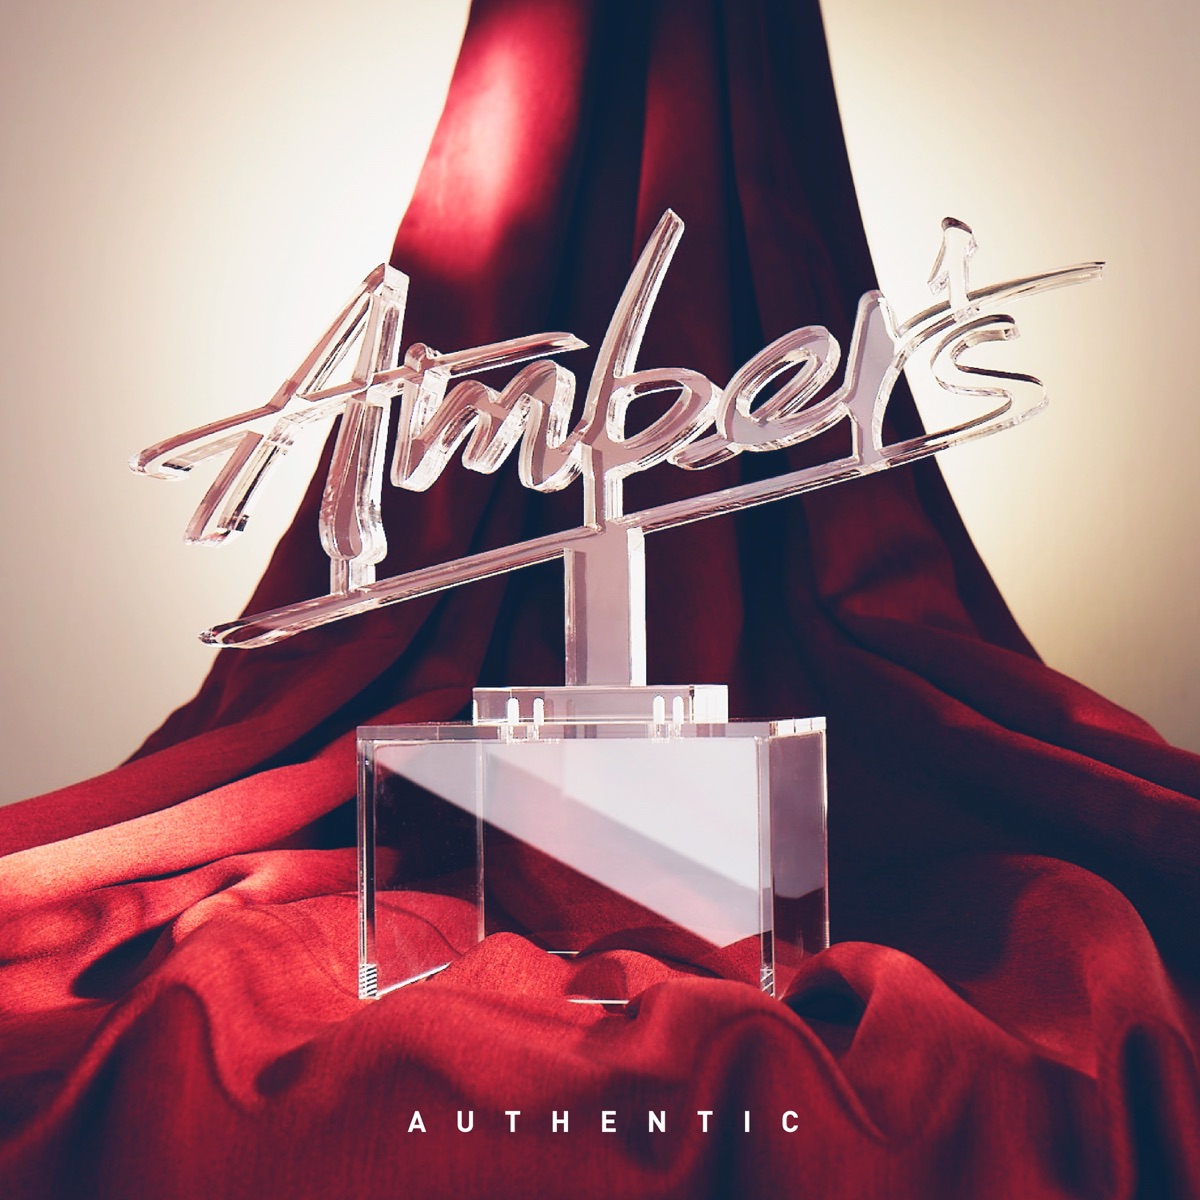 Cover art for『Amber's - 例えばの話』from the release『AUTHENTIC